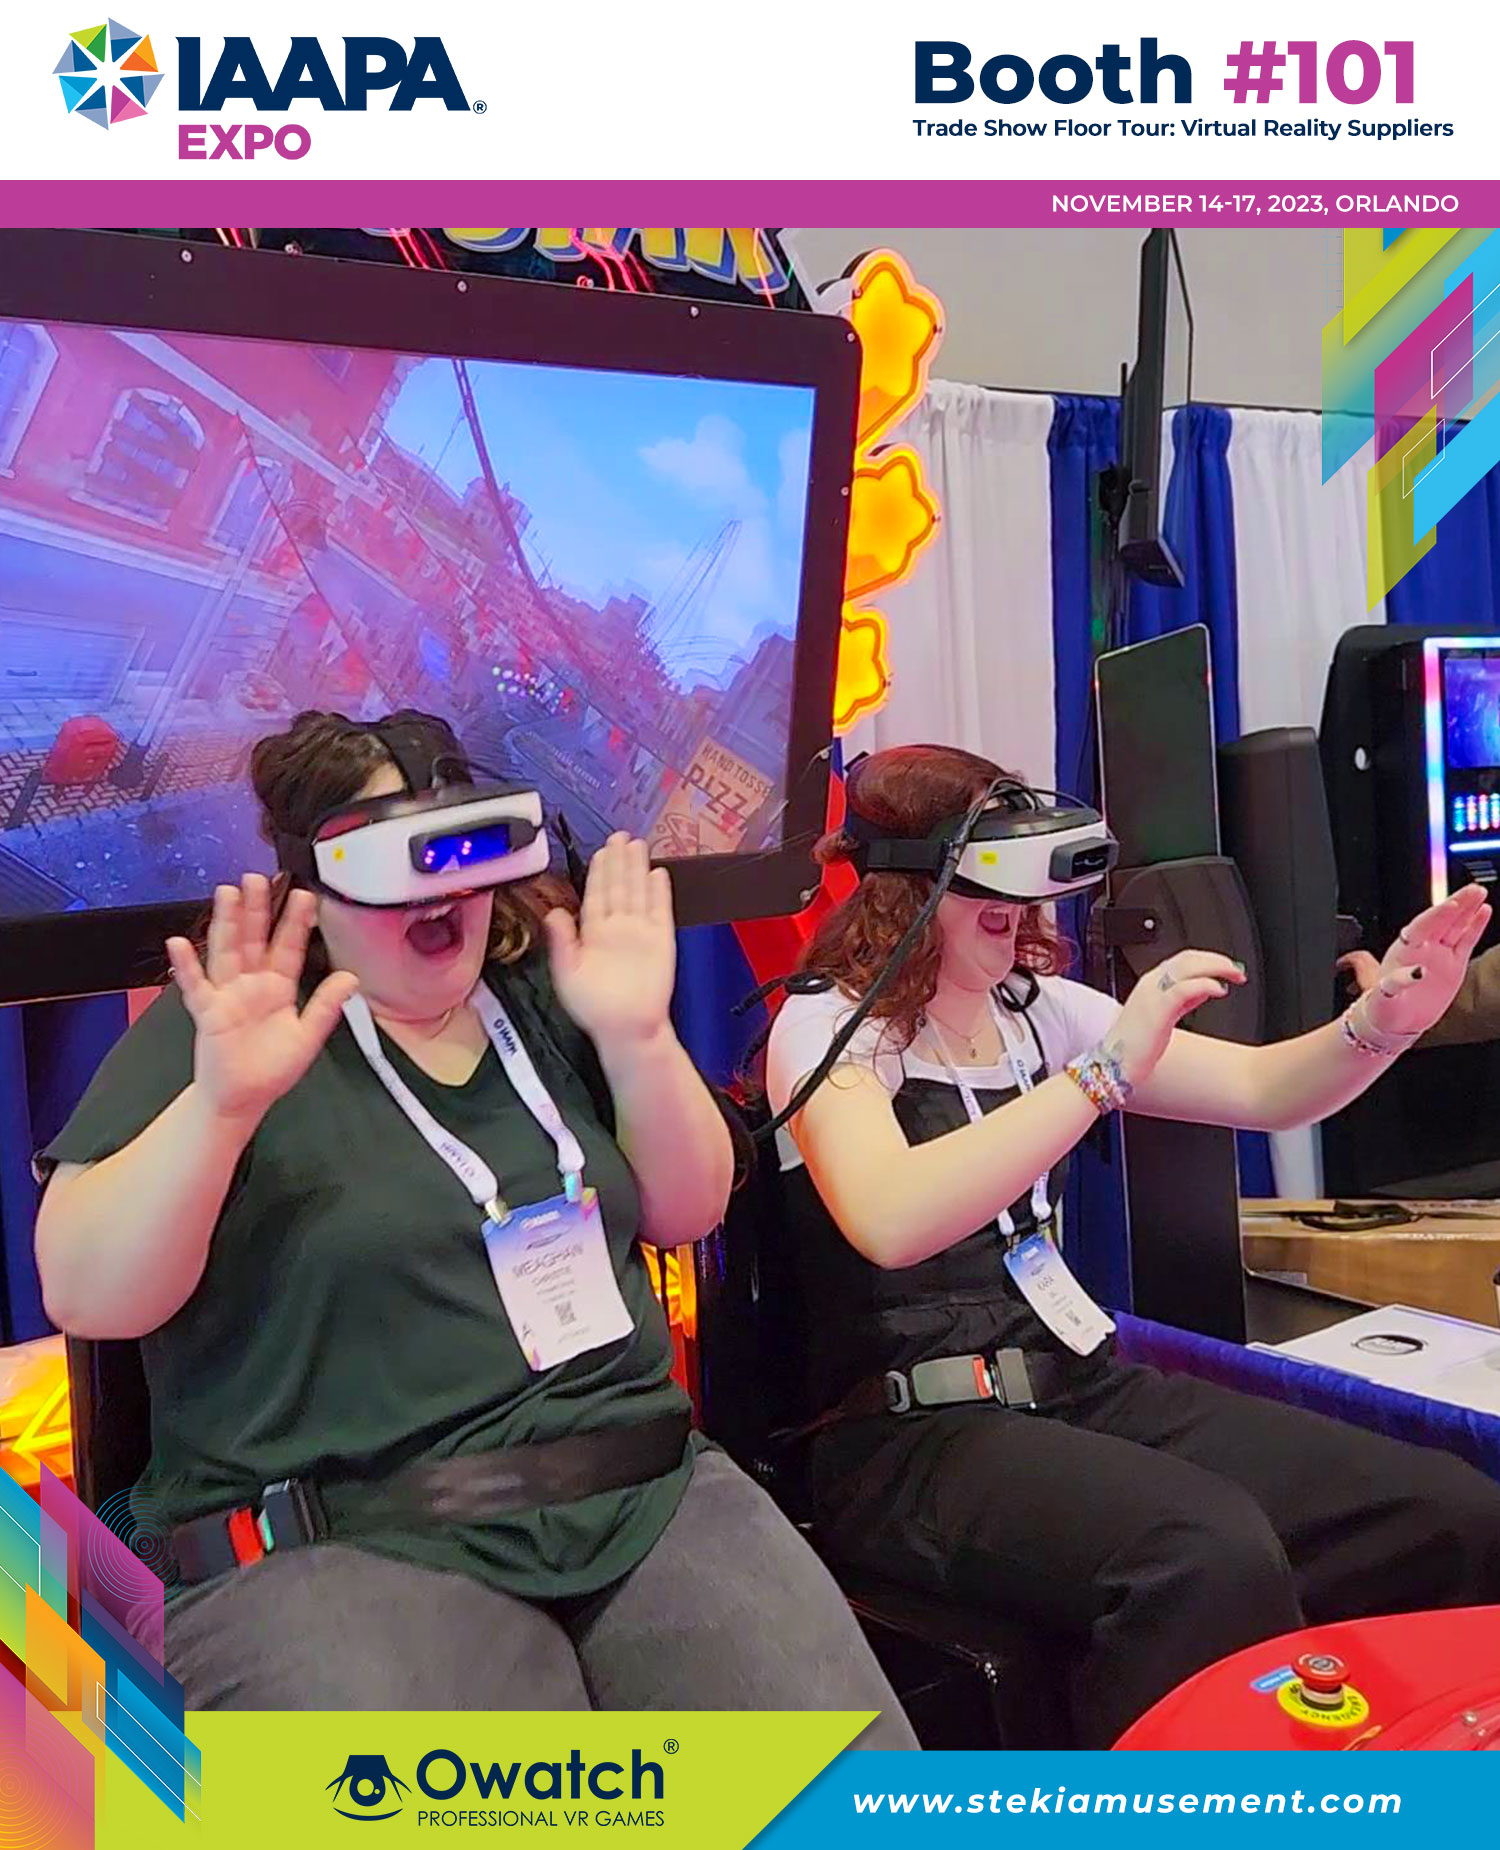 IAAPA Expo VR Beat Star: Interactive Entertainment with Friends